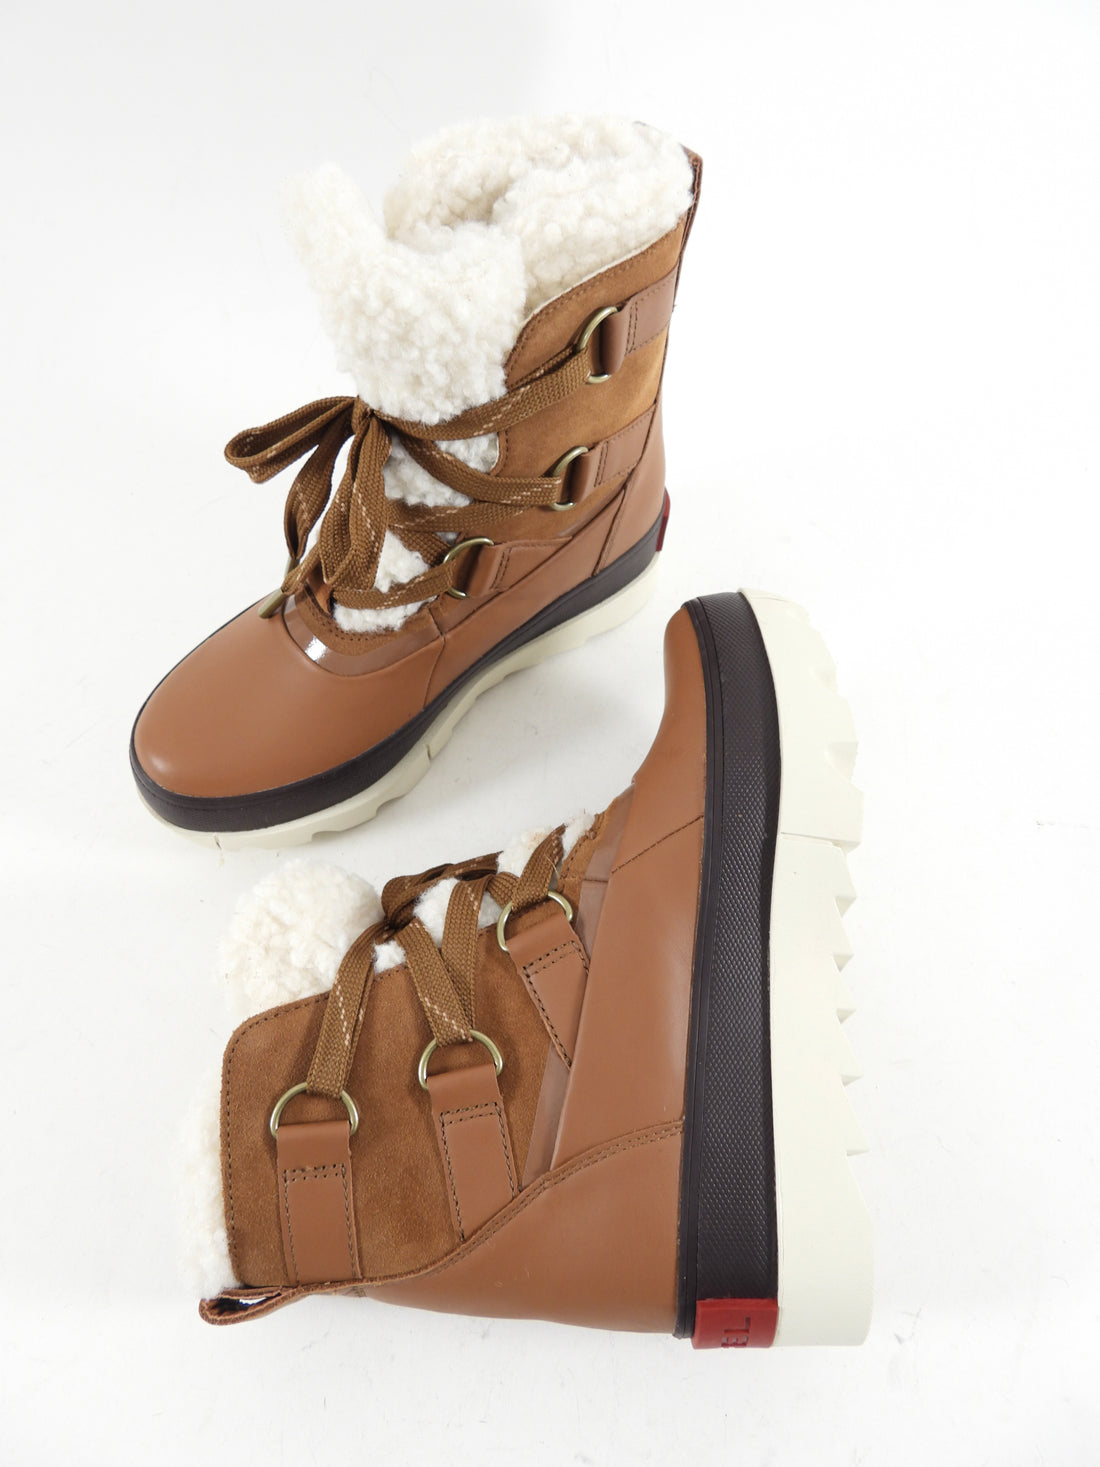 Sorel Joan of Arctic Brown Faux Shearling Snow Boots - 7